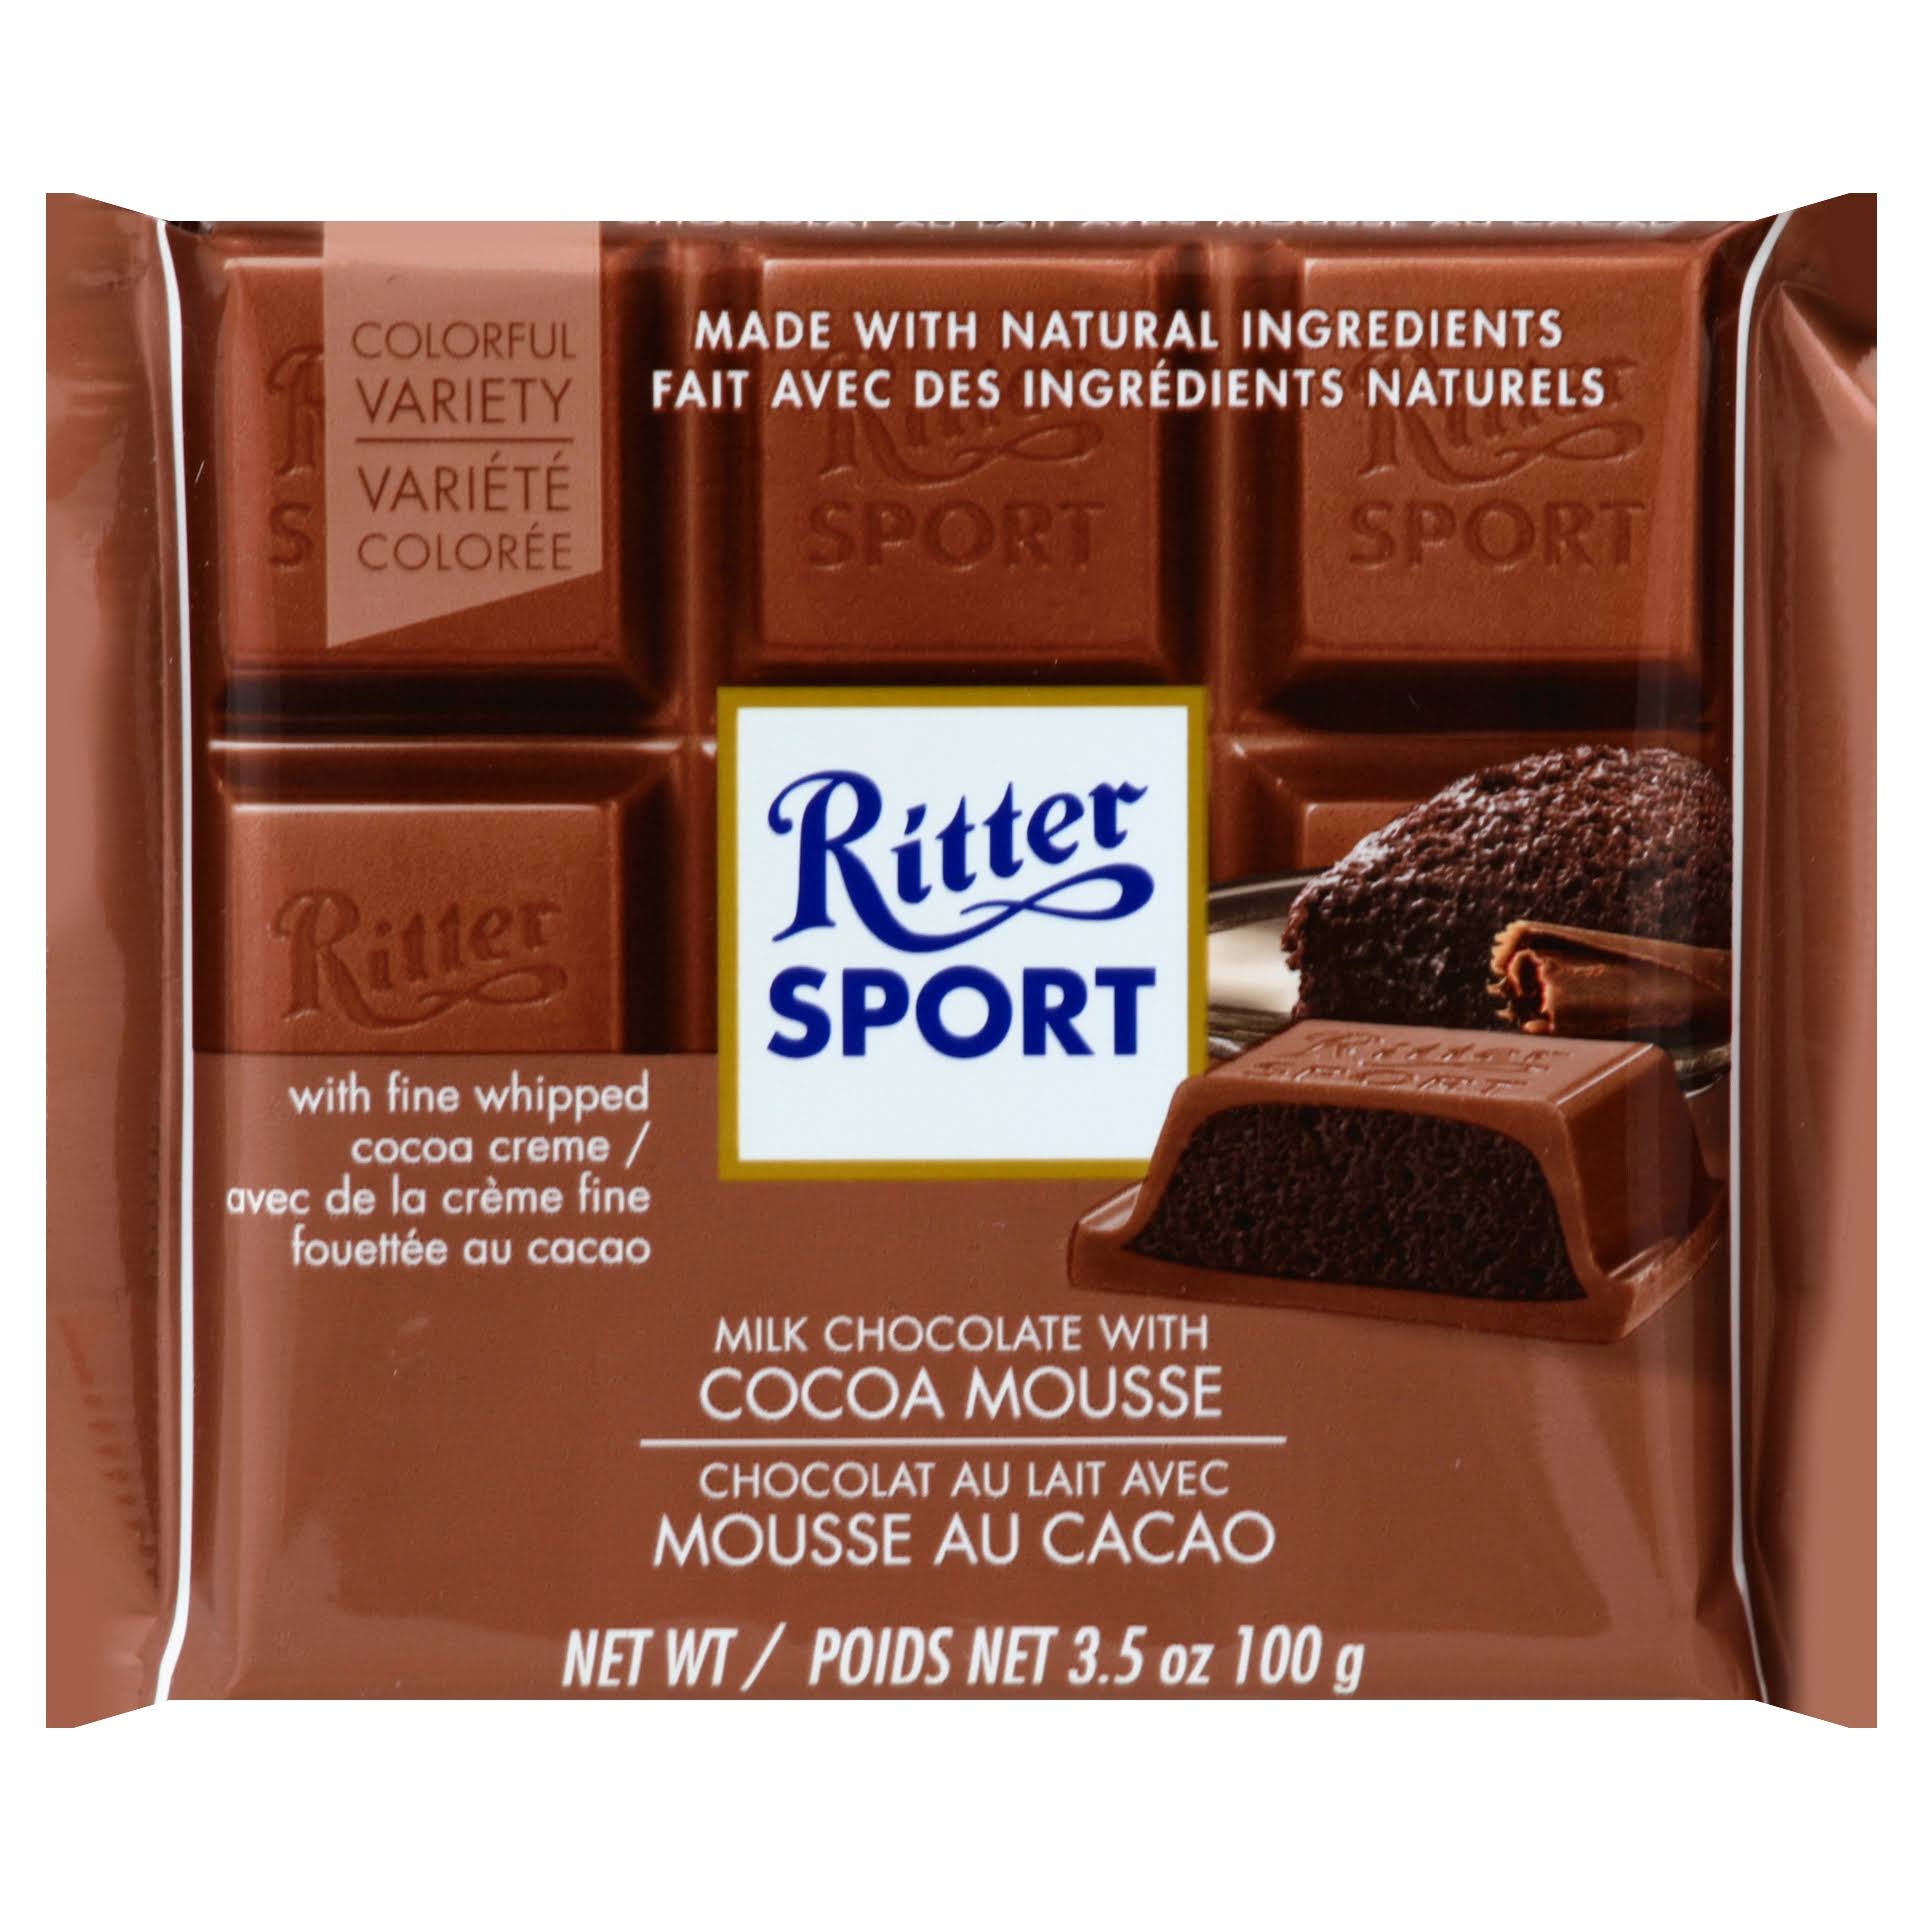 Ritter Sport Milk Chocolate Bar - Cocoa Mousse, 100g